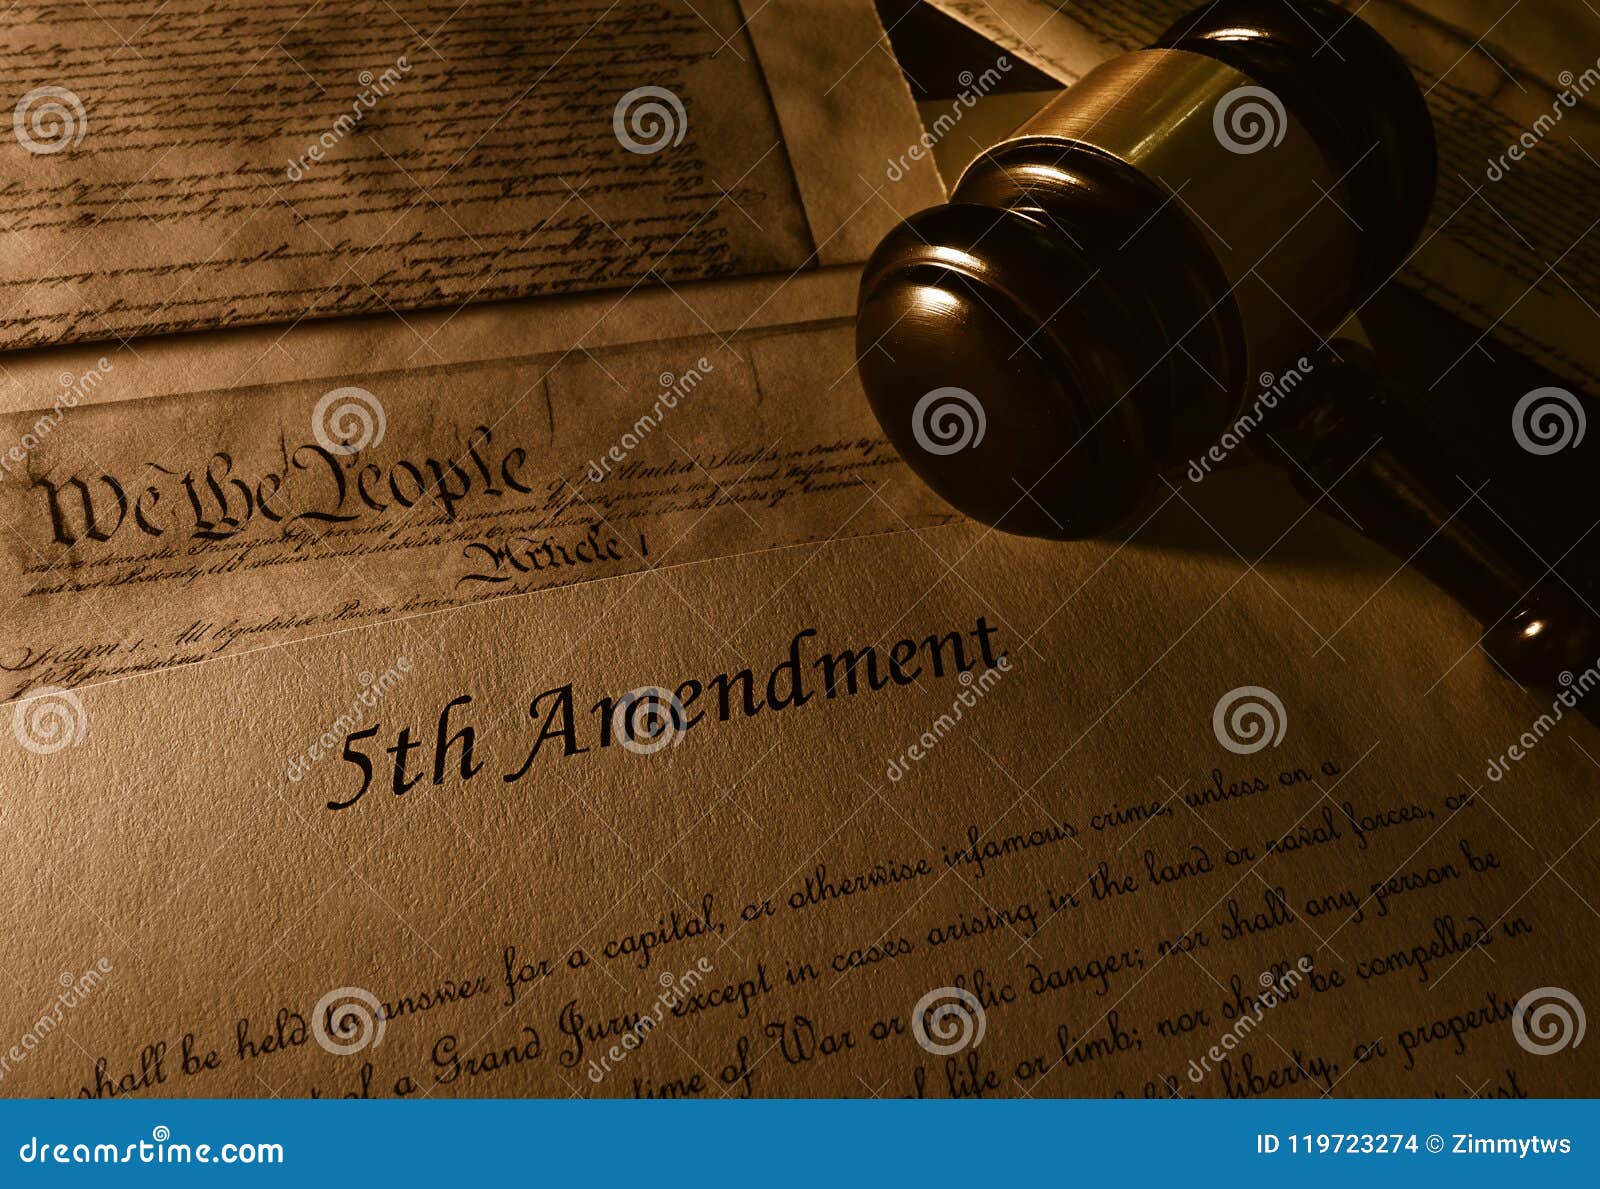 fifth amendment to the constitution